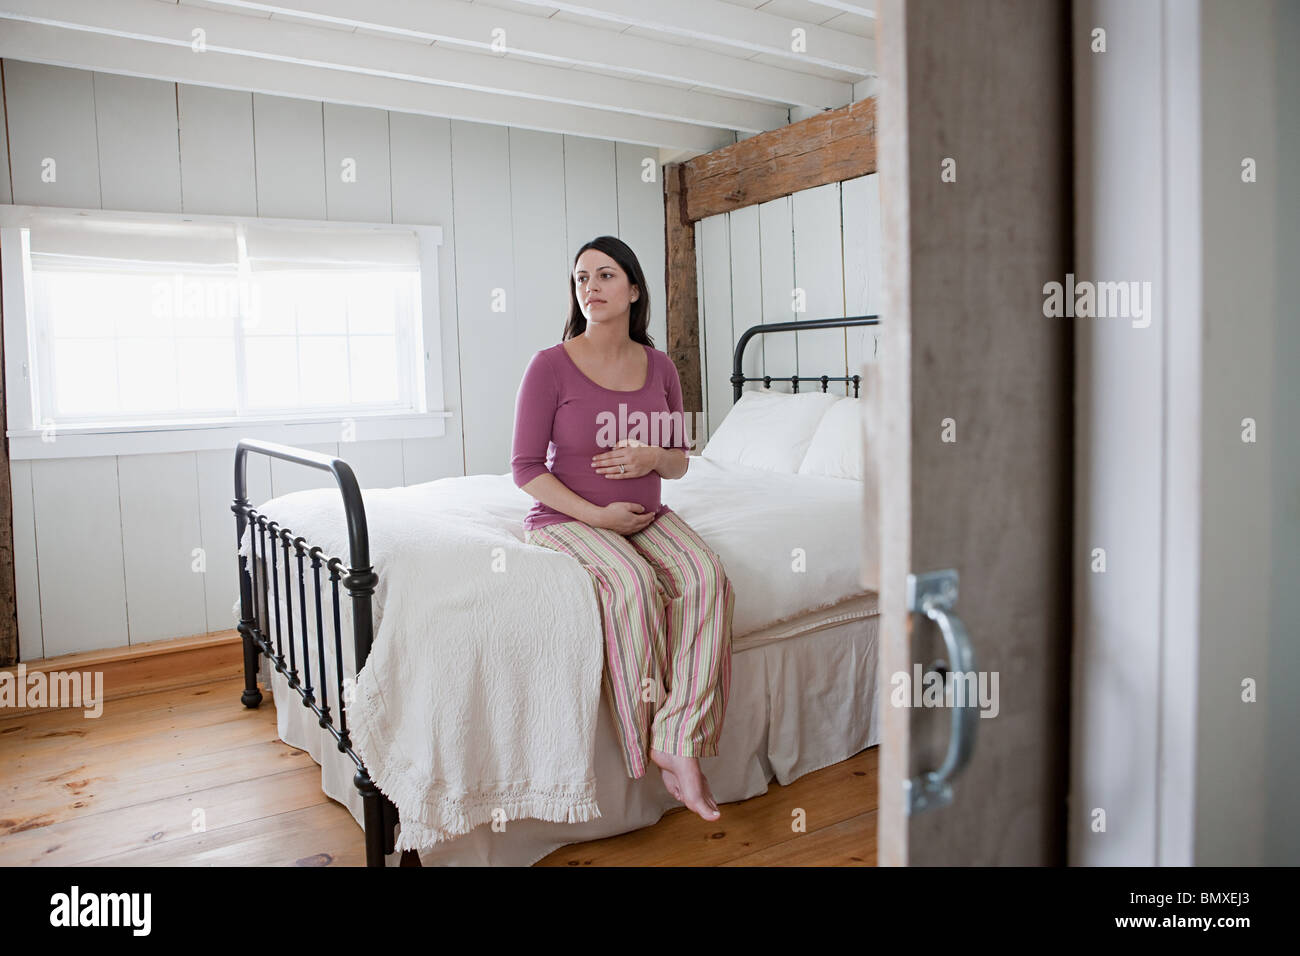 Expectant mother sitting on bed Stock Photo